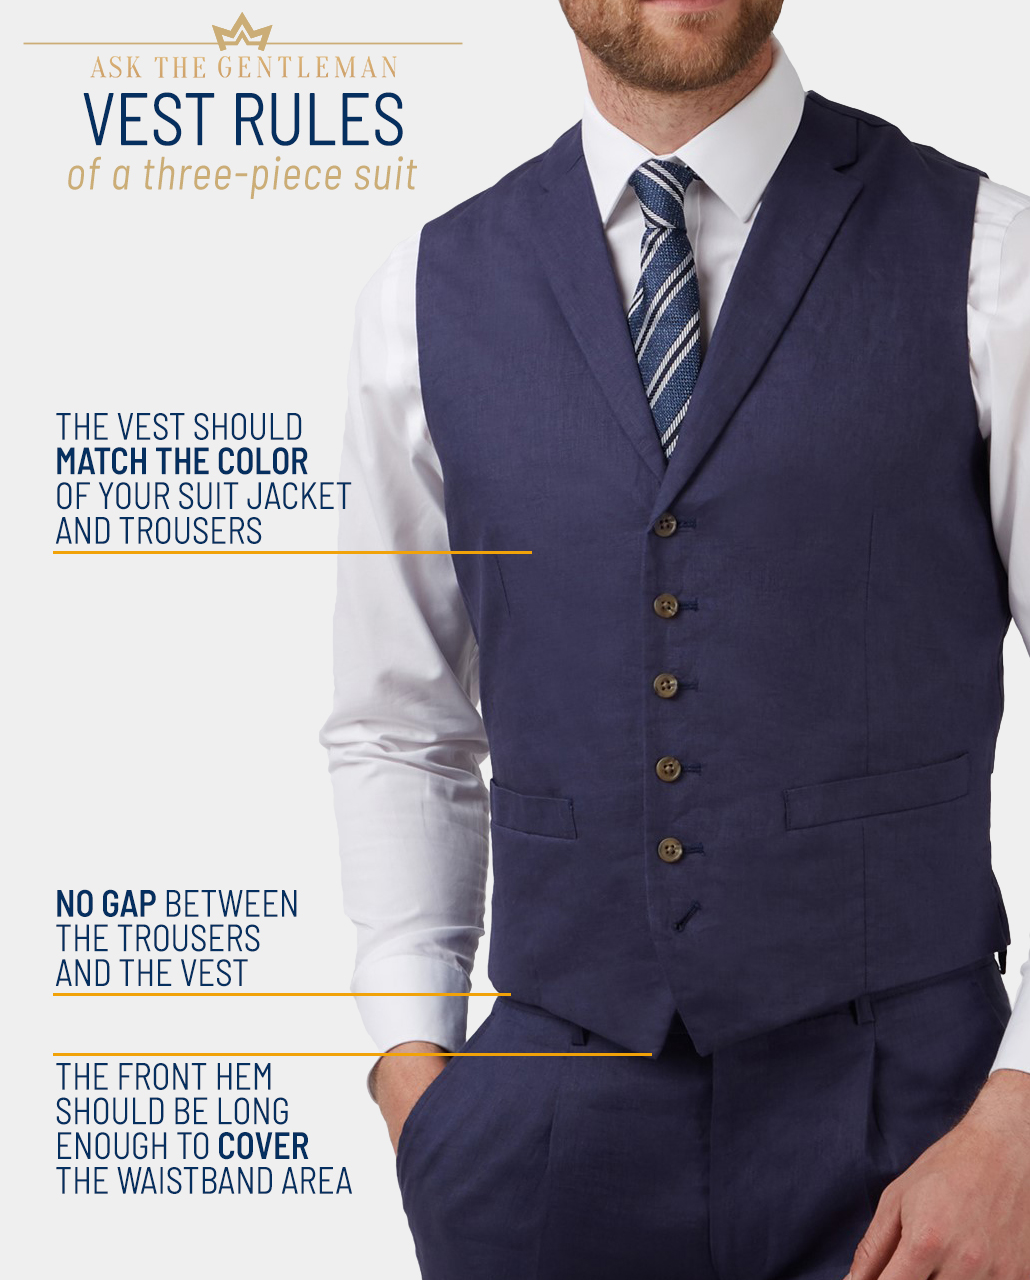 Basic rules of a three-piece suit vest